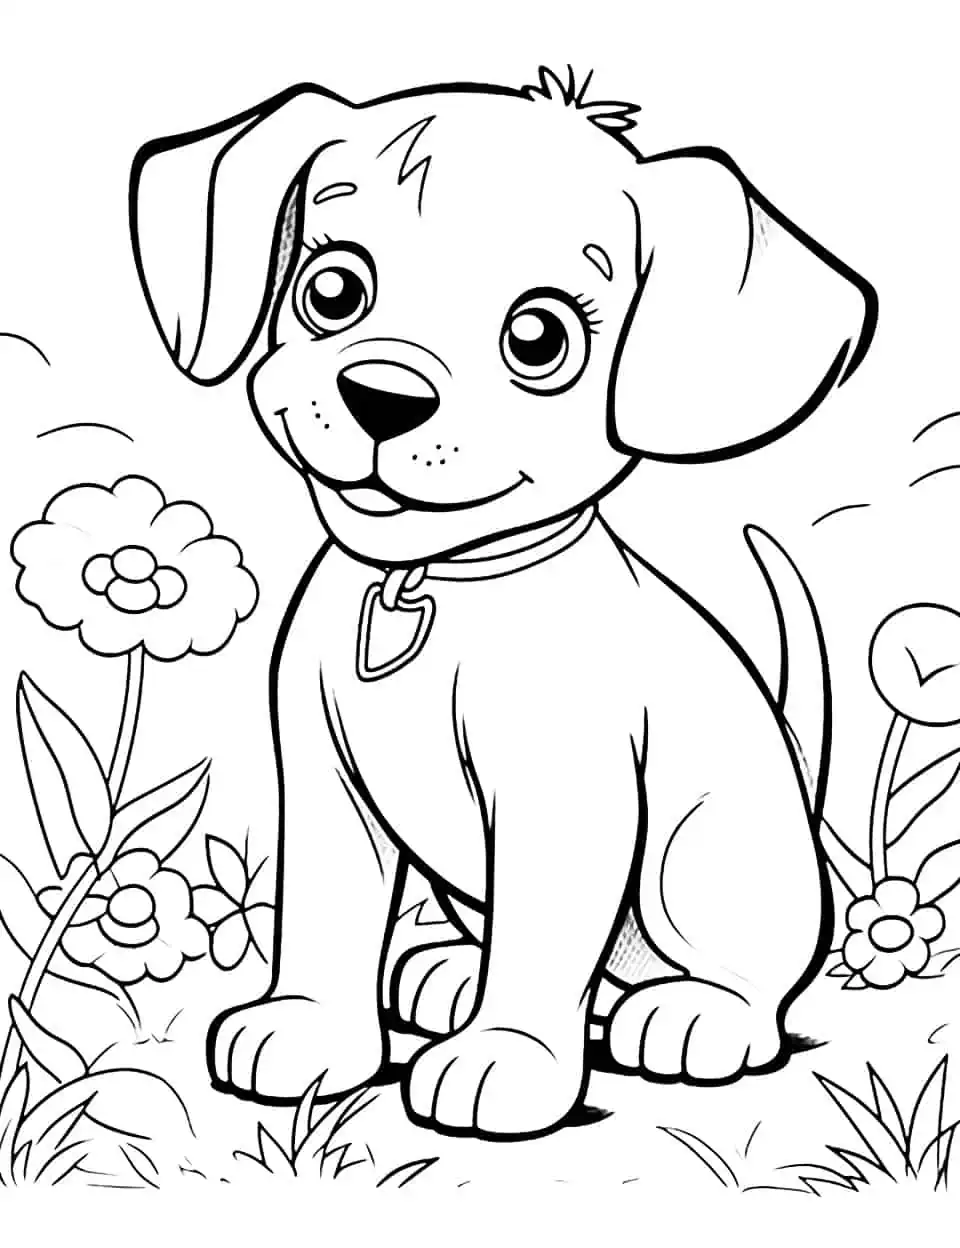 Baby Dog's Adventure Dog Coloring Page - A coloring book story about a baby dog’s adventure in the park.